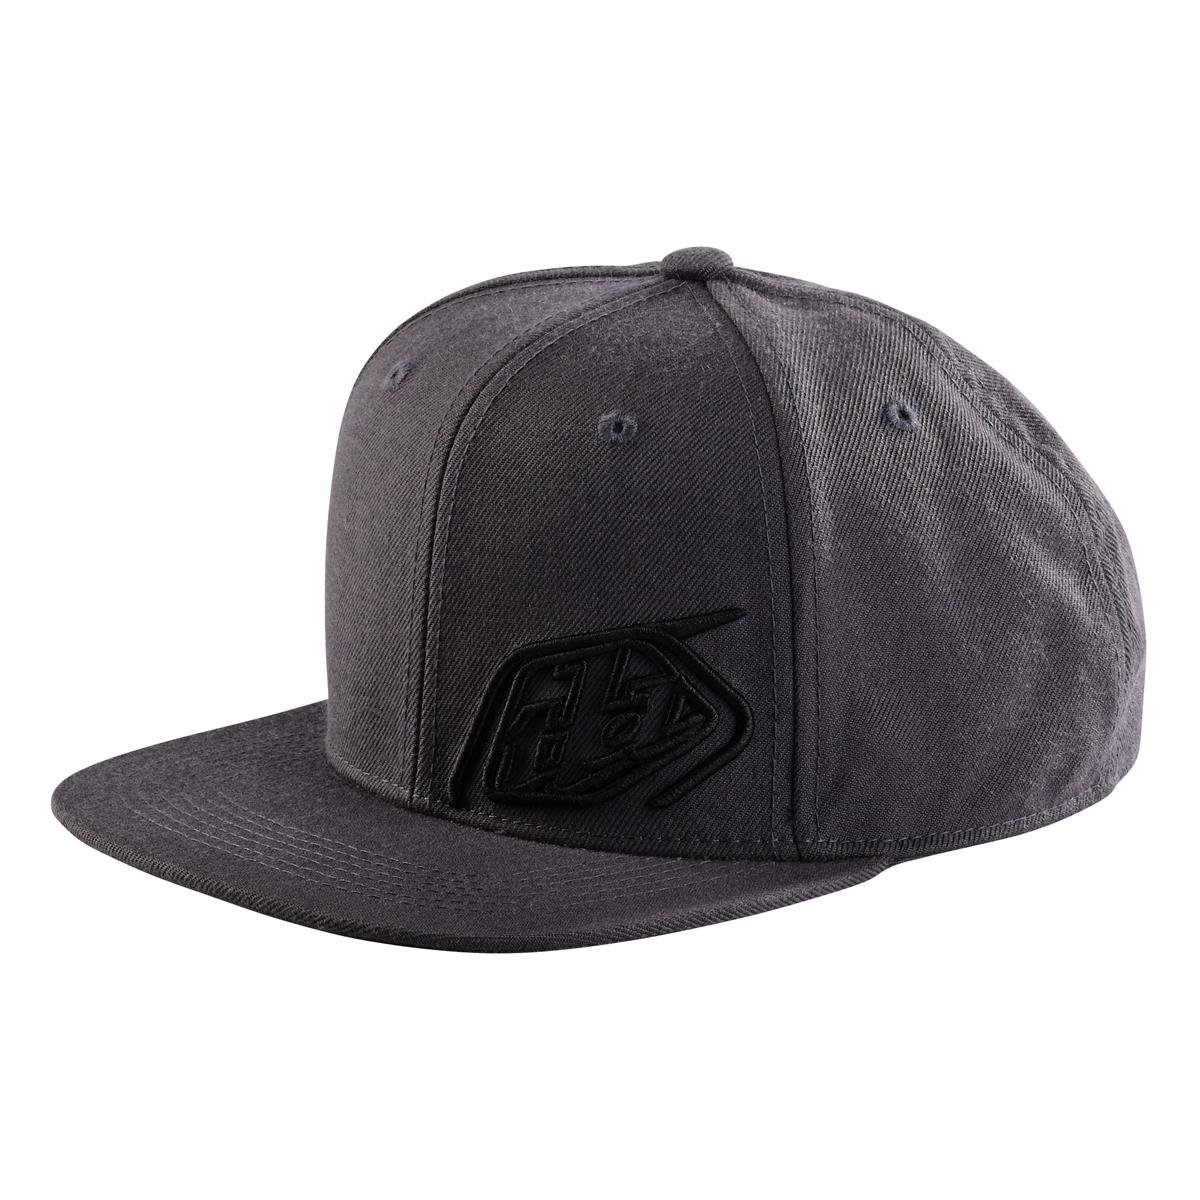 Troy Lee Designs 9Fifty Cappellino Snap Back Slice Dark Gray/Charcoal